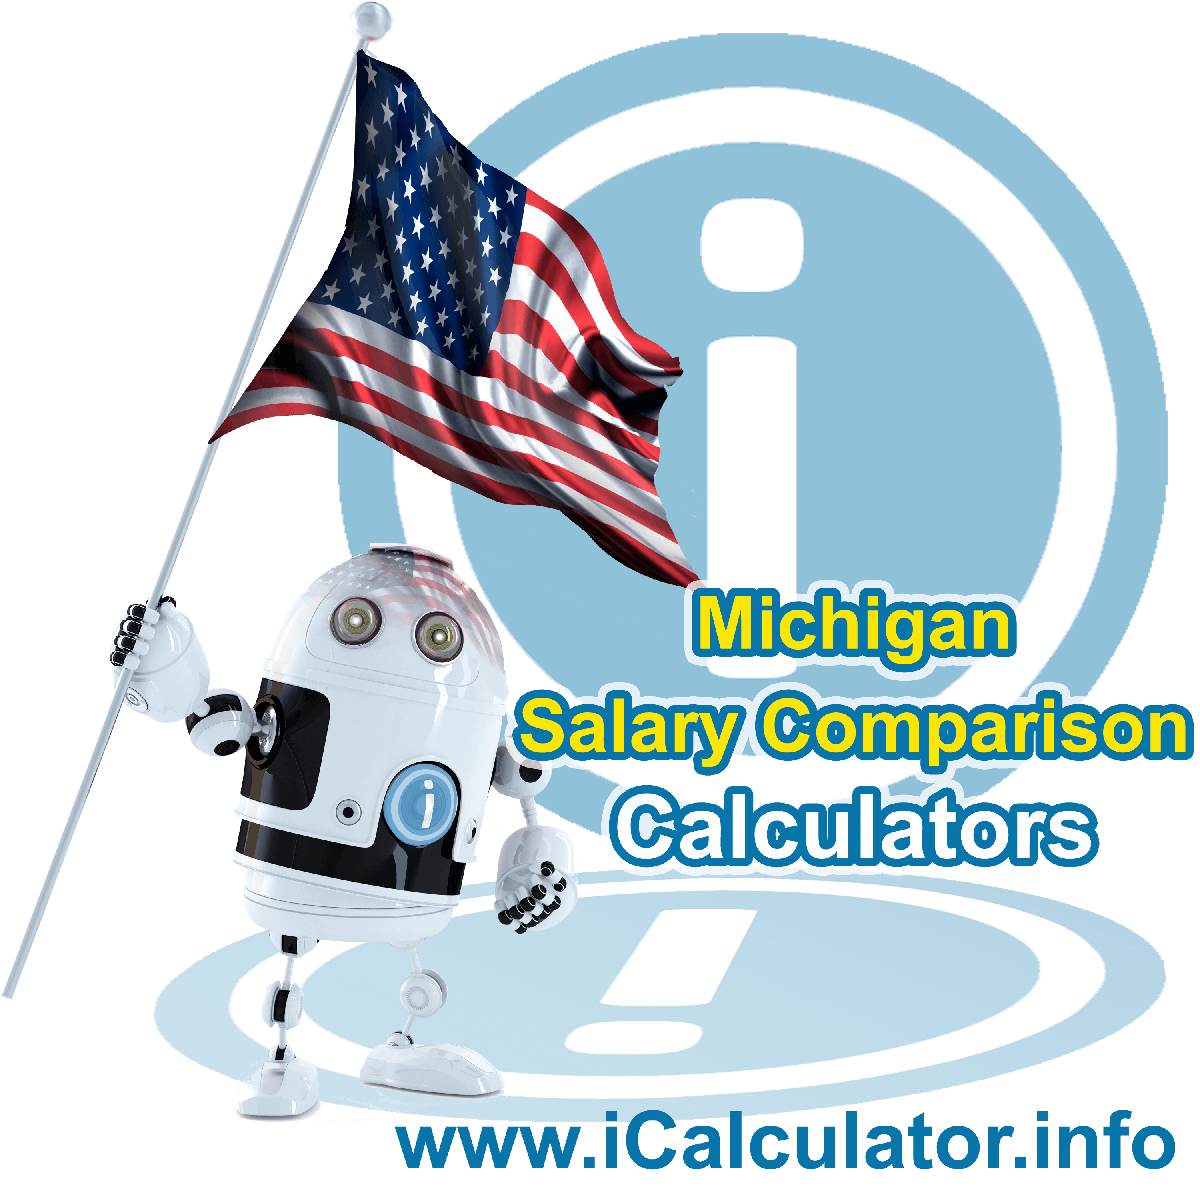 Michigan Salary Comparison Calculator 2023 | iCalculator™ | The Michigan Salary Comparison Calculator allows you to quickly calculate and compare upto 6 salaries in Michigan or compare with other states for the 2023 tax year and historical tax years. 